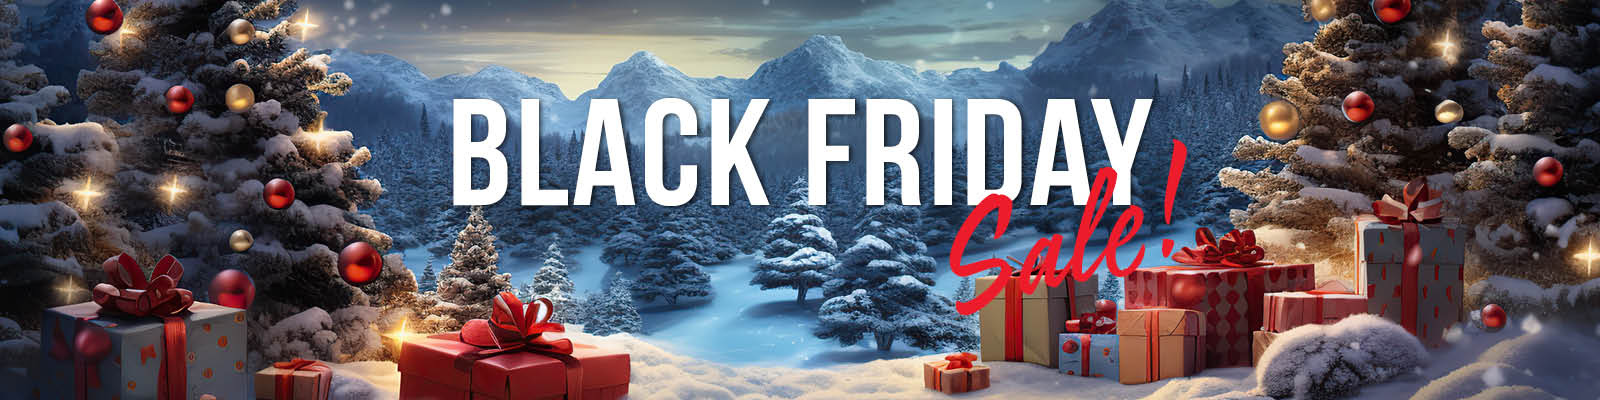 Find gifts for your loved ones at Smith & Edwards during our Black Friday Sale!